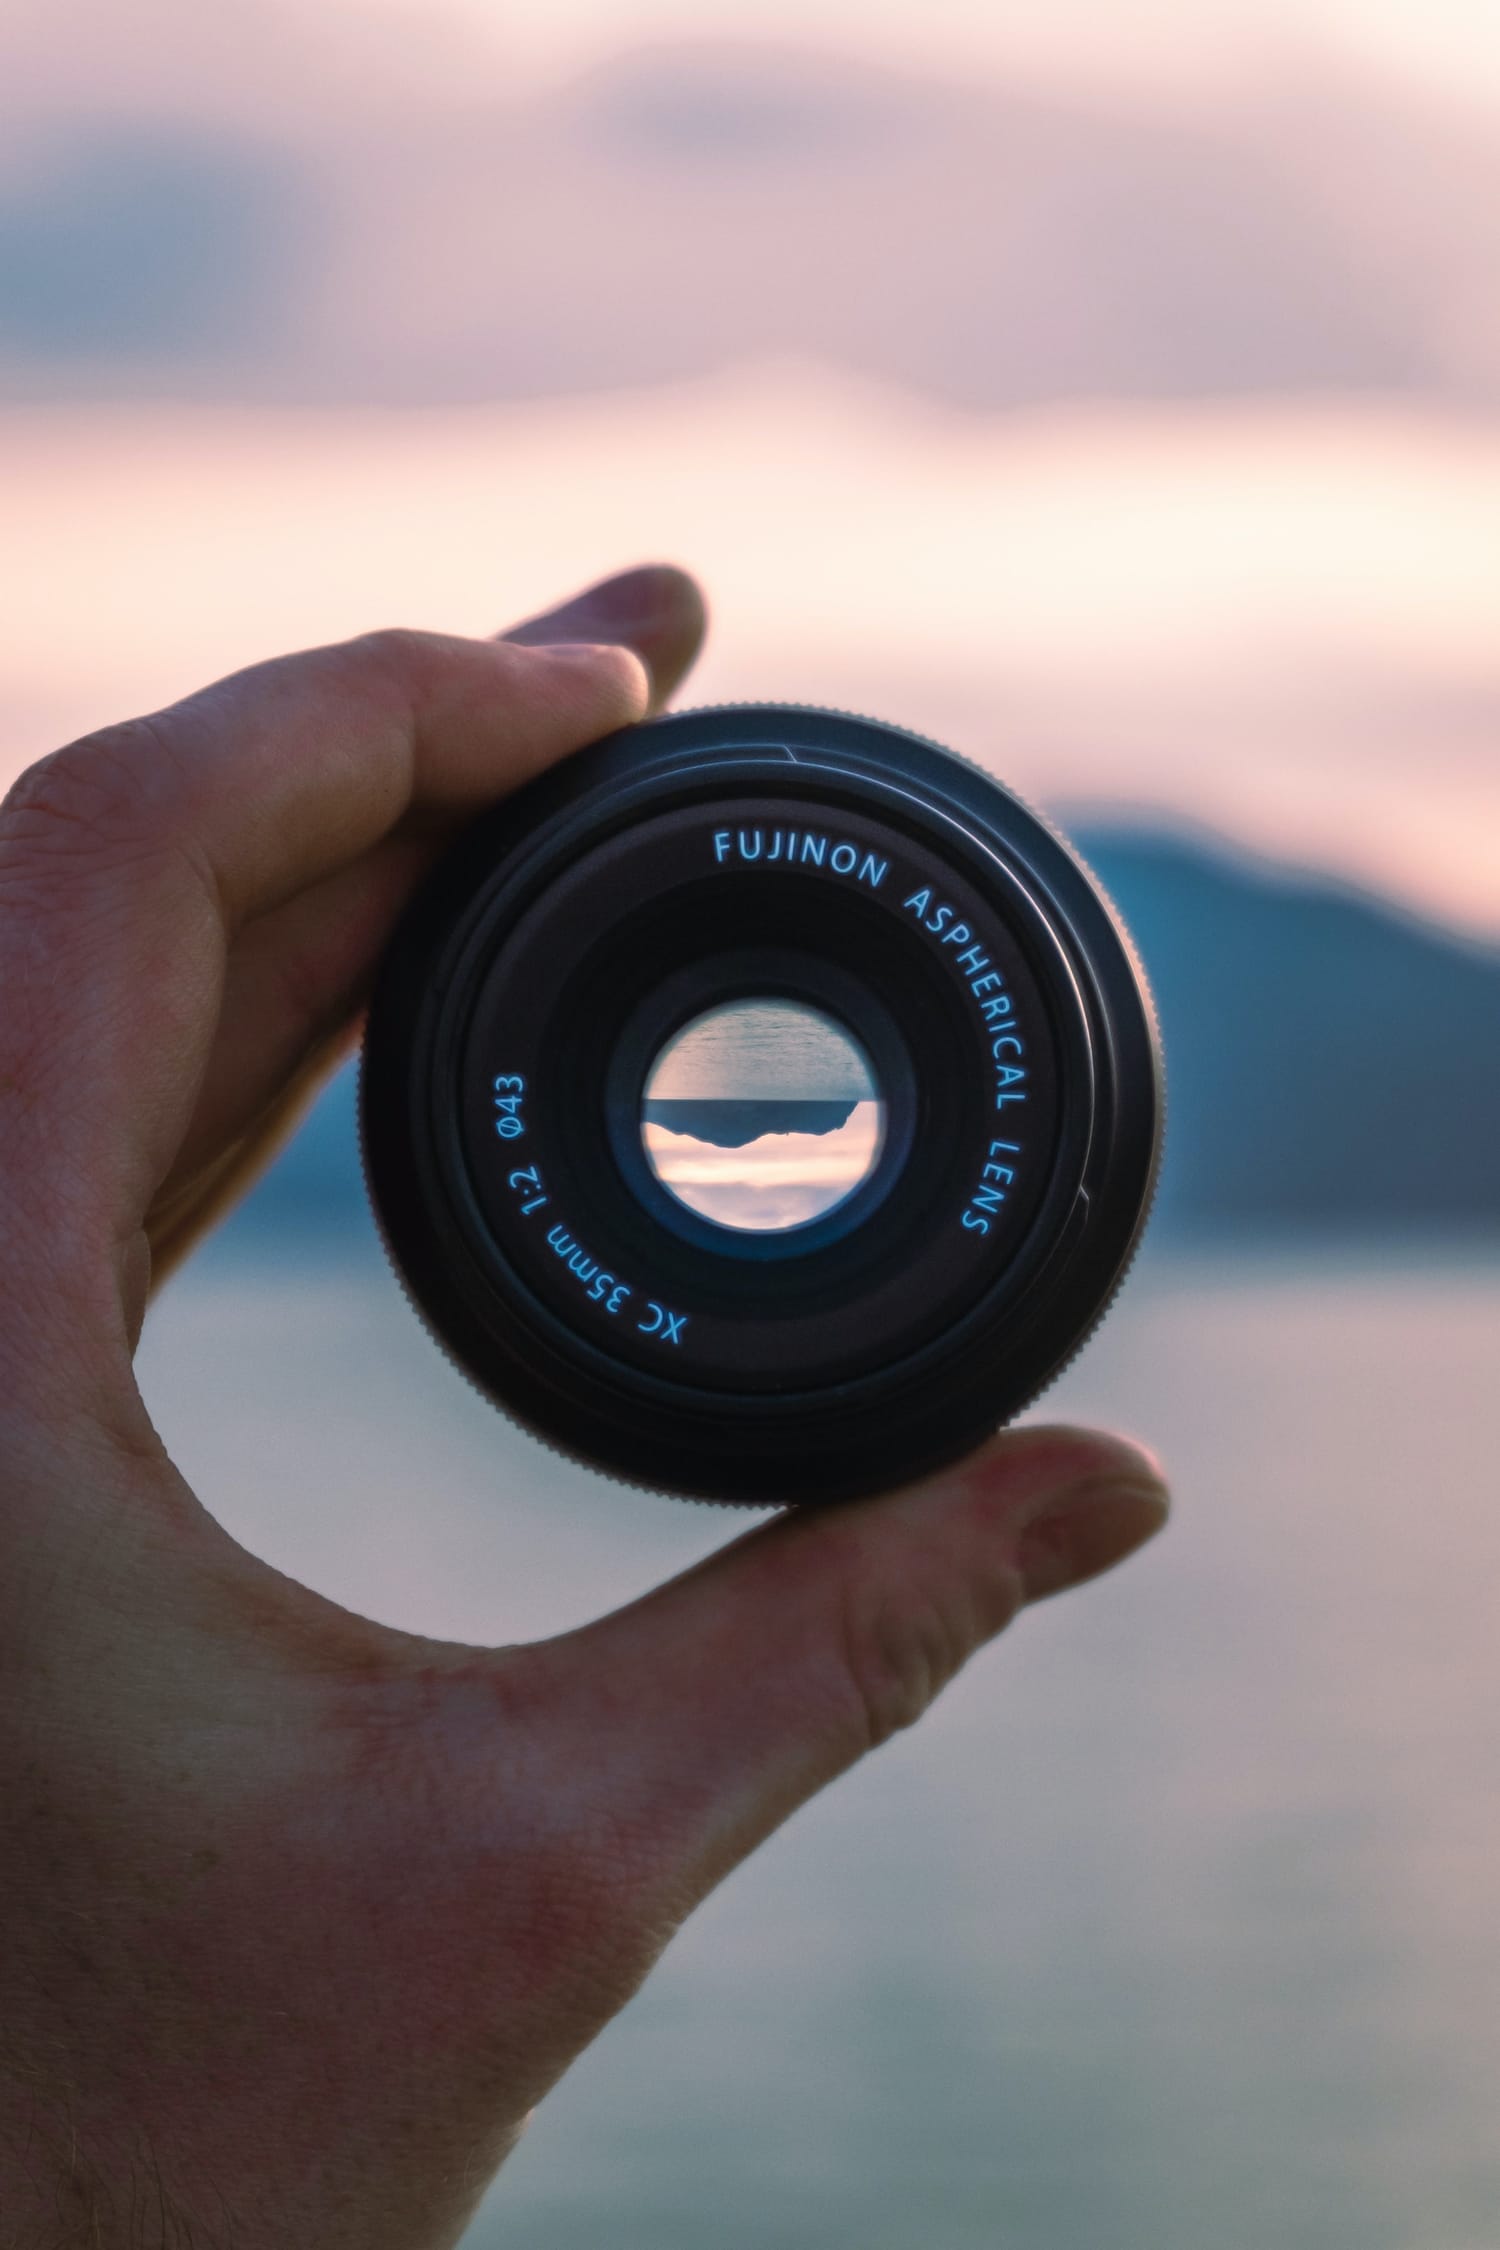 Prime Lenses: 6 Amazing Focal Lengths Every Photographer Should Have